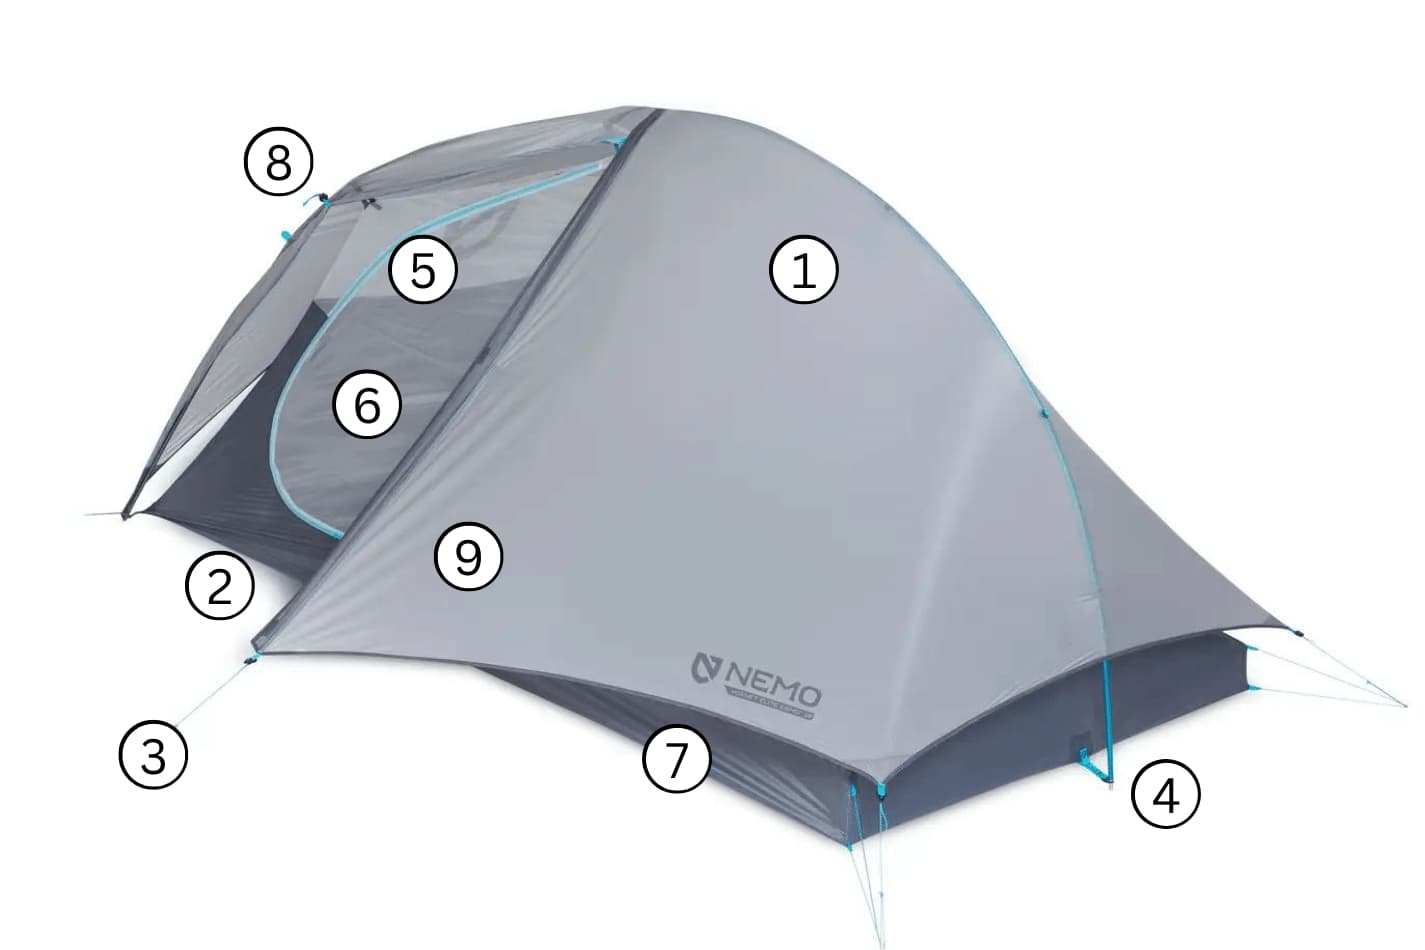 Nemo Elite double wall tent with points of interest noted for the below post content.